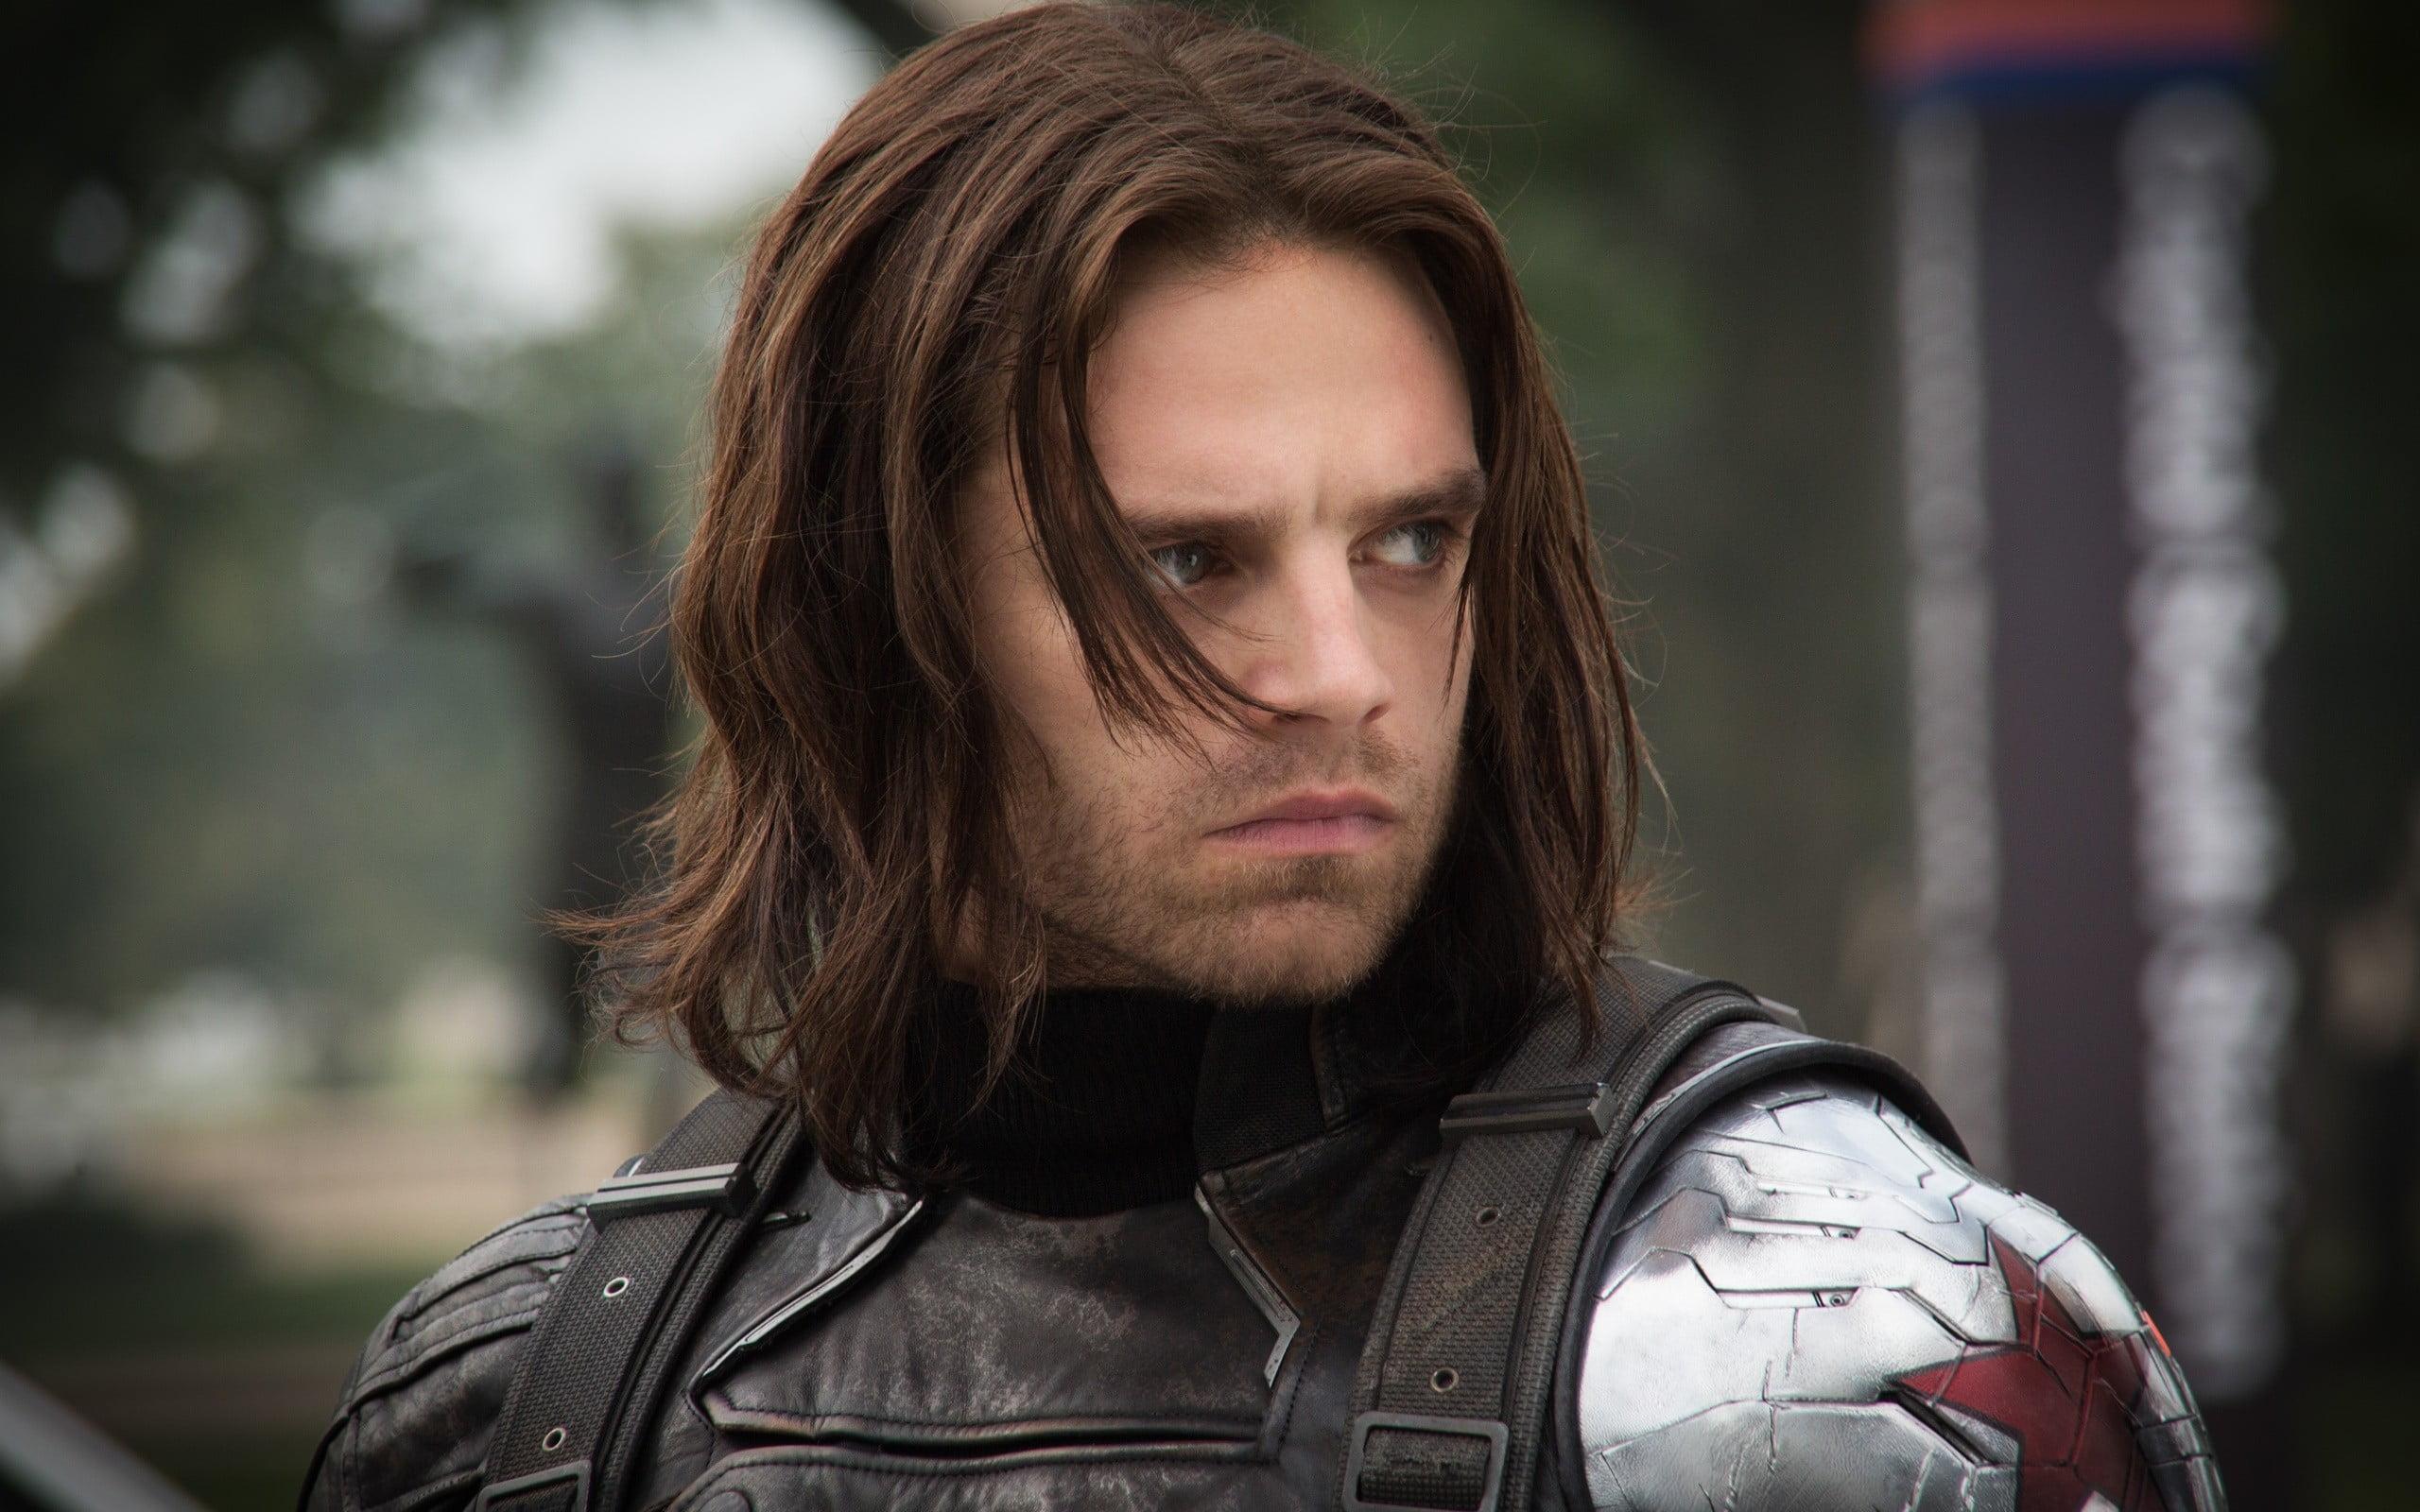 Man with armor, Captain America: The Winter Soldier, Bucky